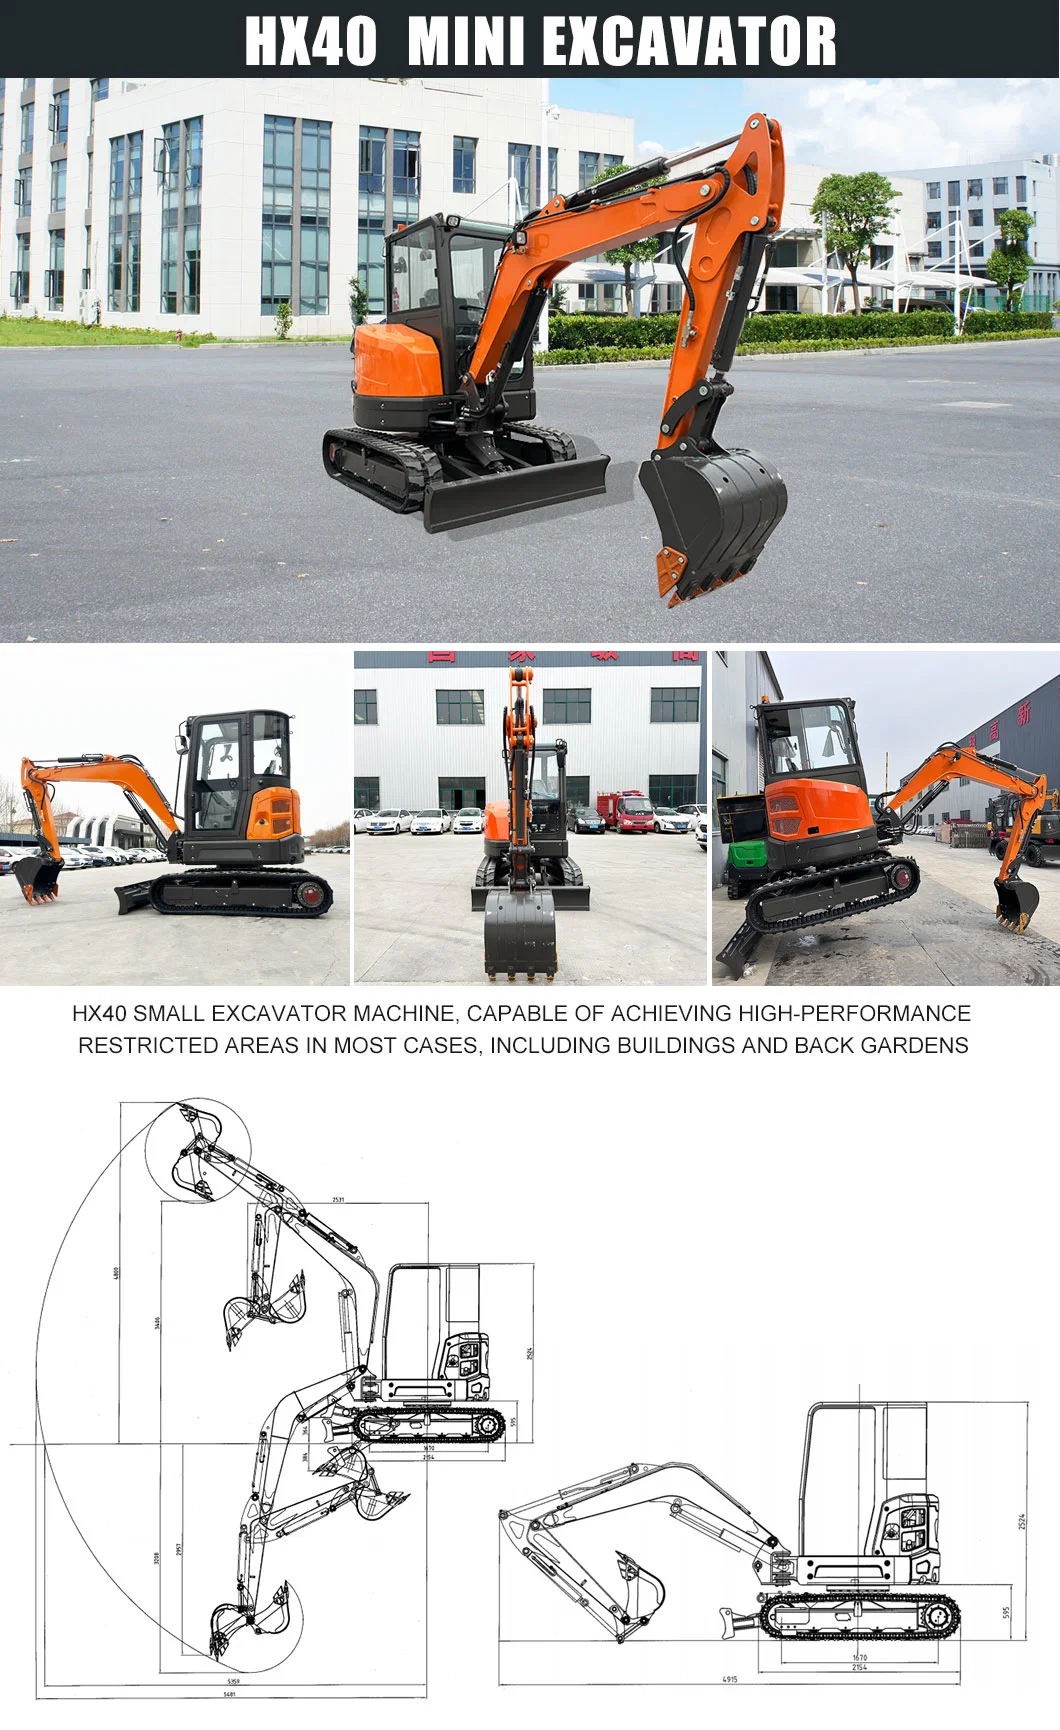 Cheap 2 Ton 3 T Mini Excavator Price CE Approved Mini Digger for Sale Small Construction Machinery Agricultural Excavators Crawler Excavators